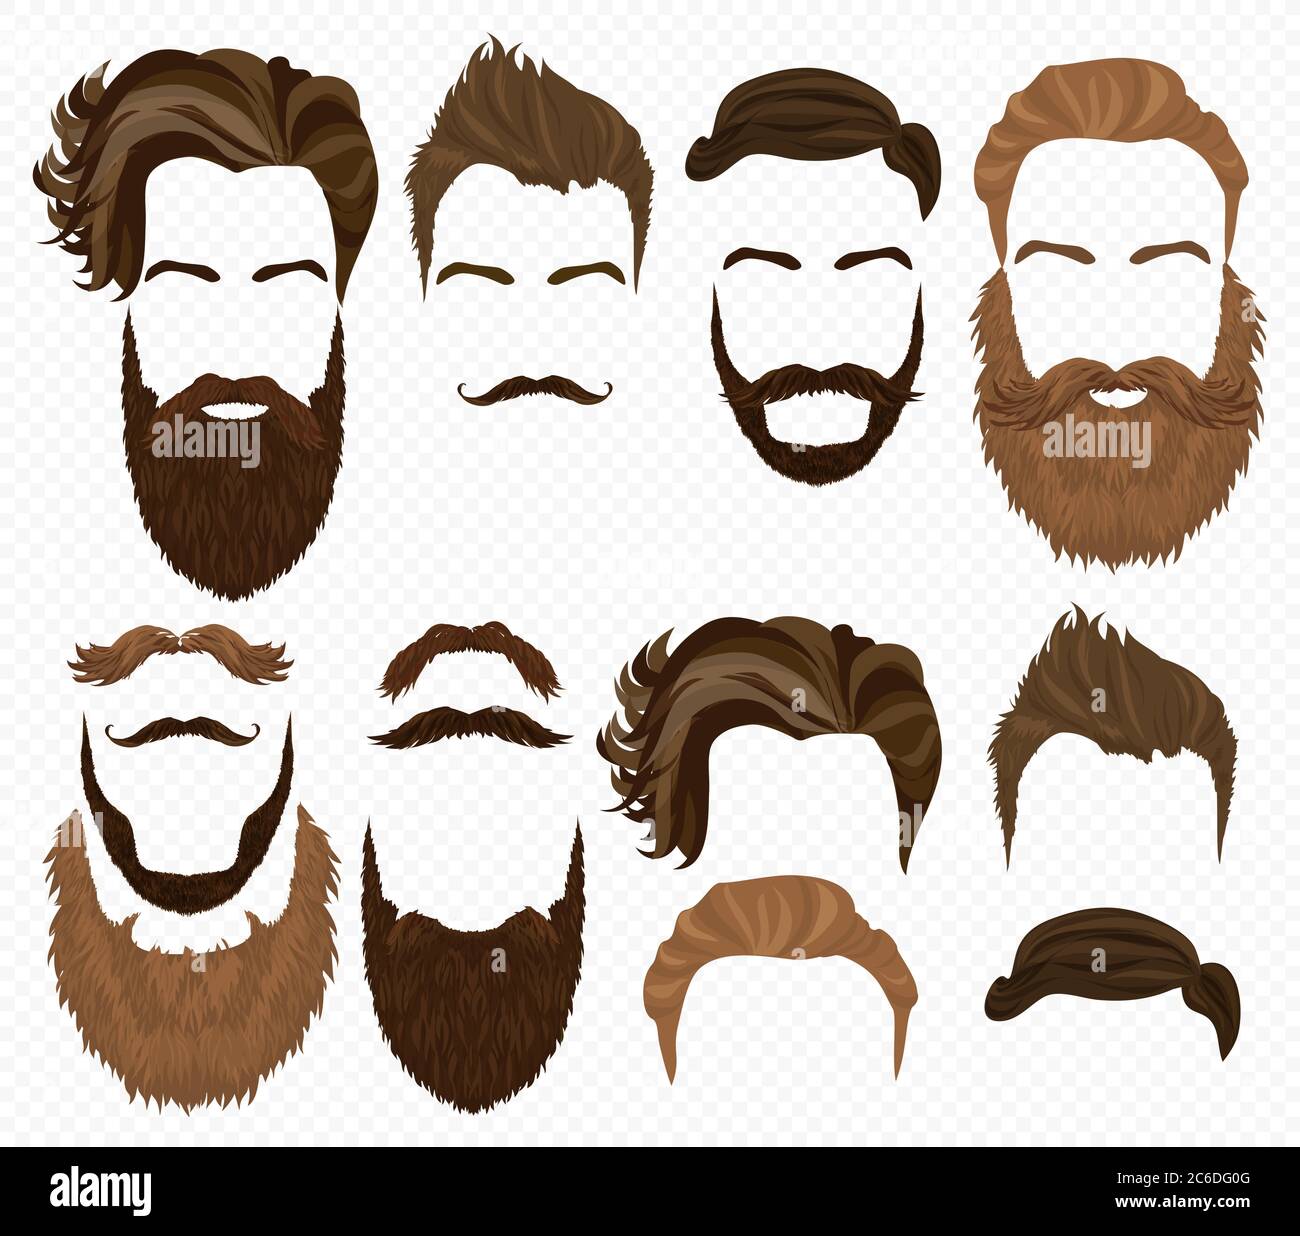 Man hair and beards styles hipster fashion high Vector Image